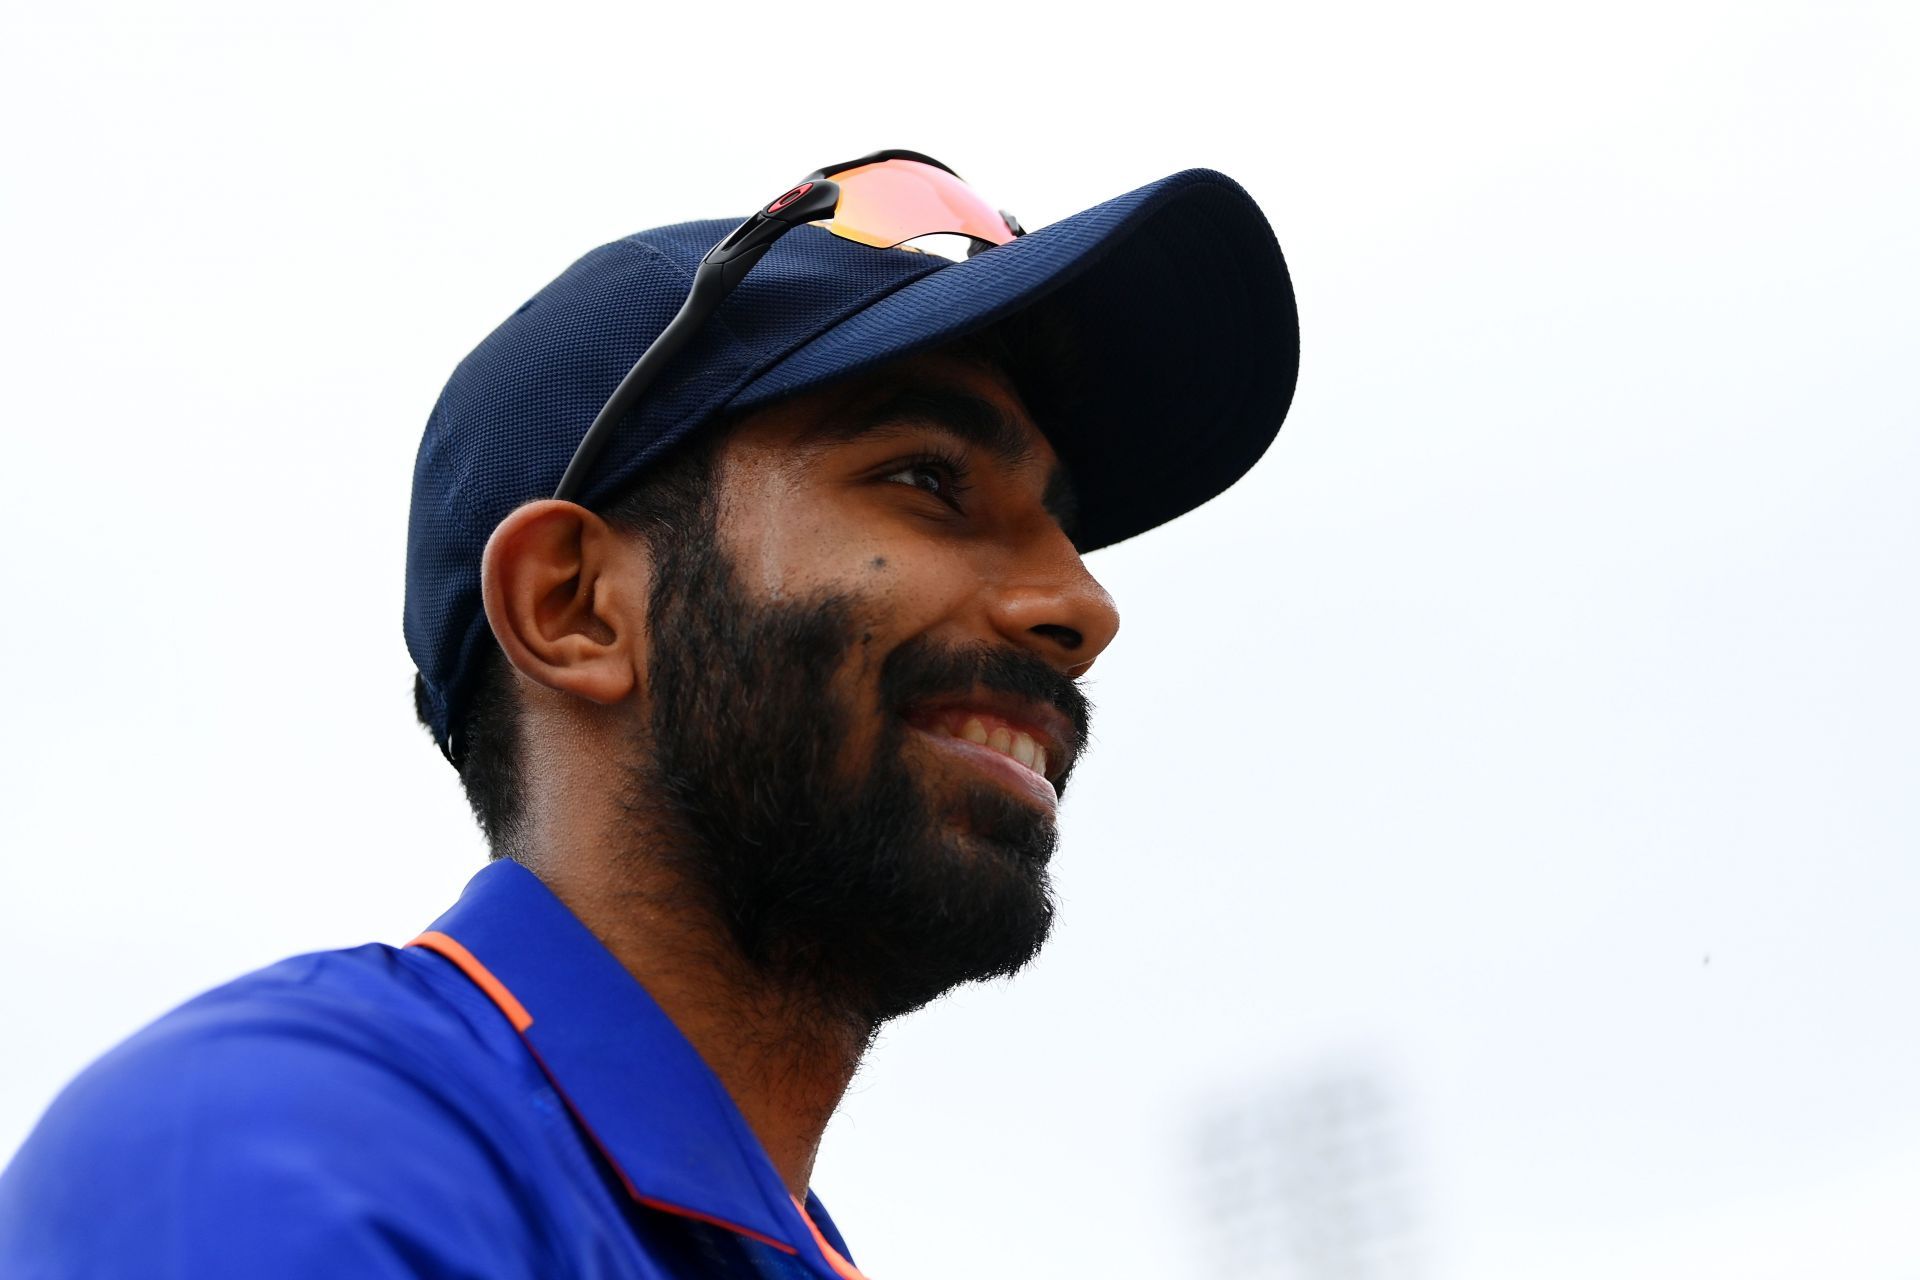 England v India - 1st Royal London Series One Day International (Image: Getty)